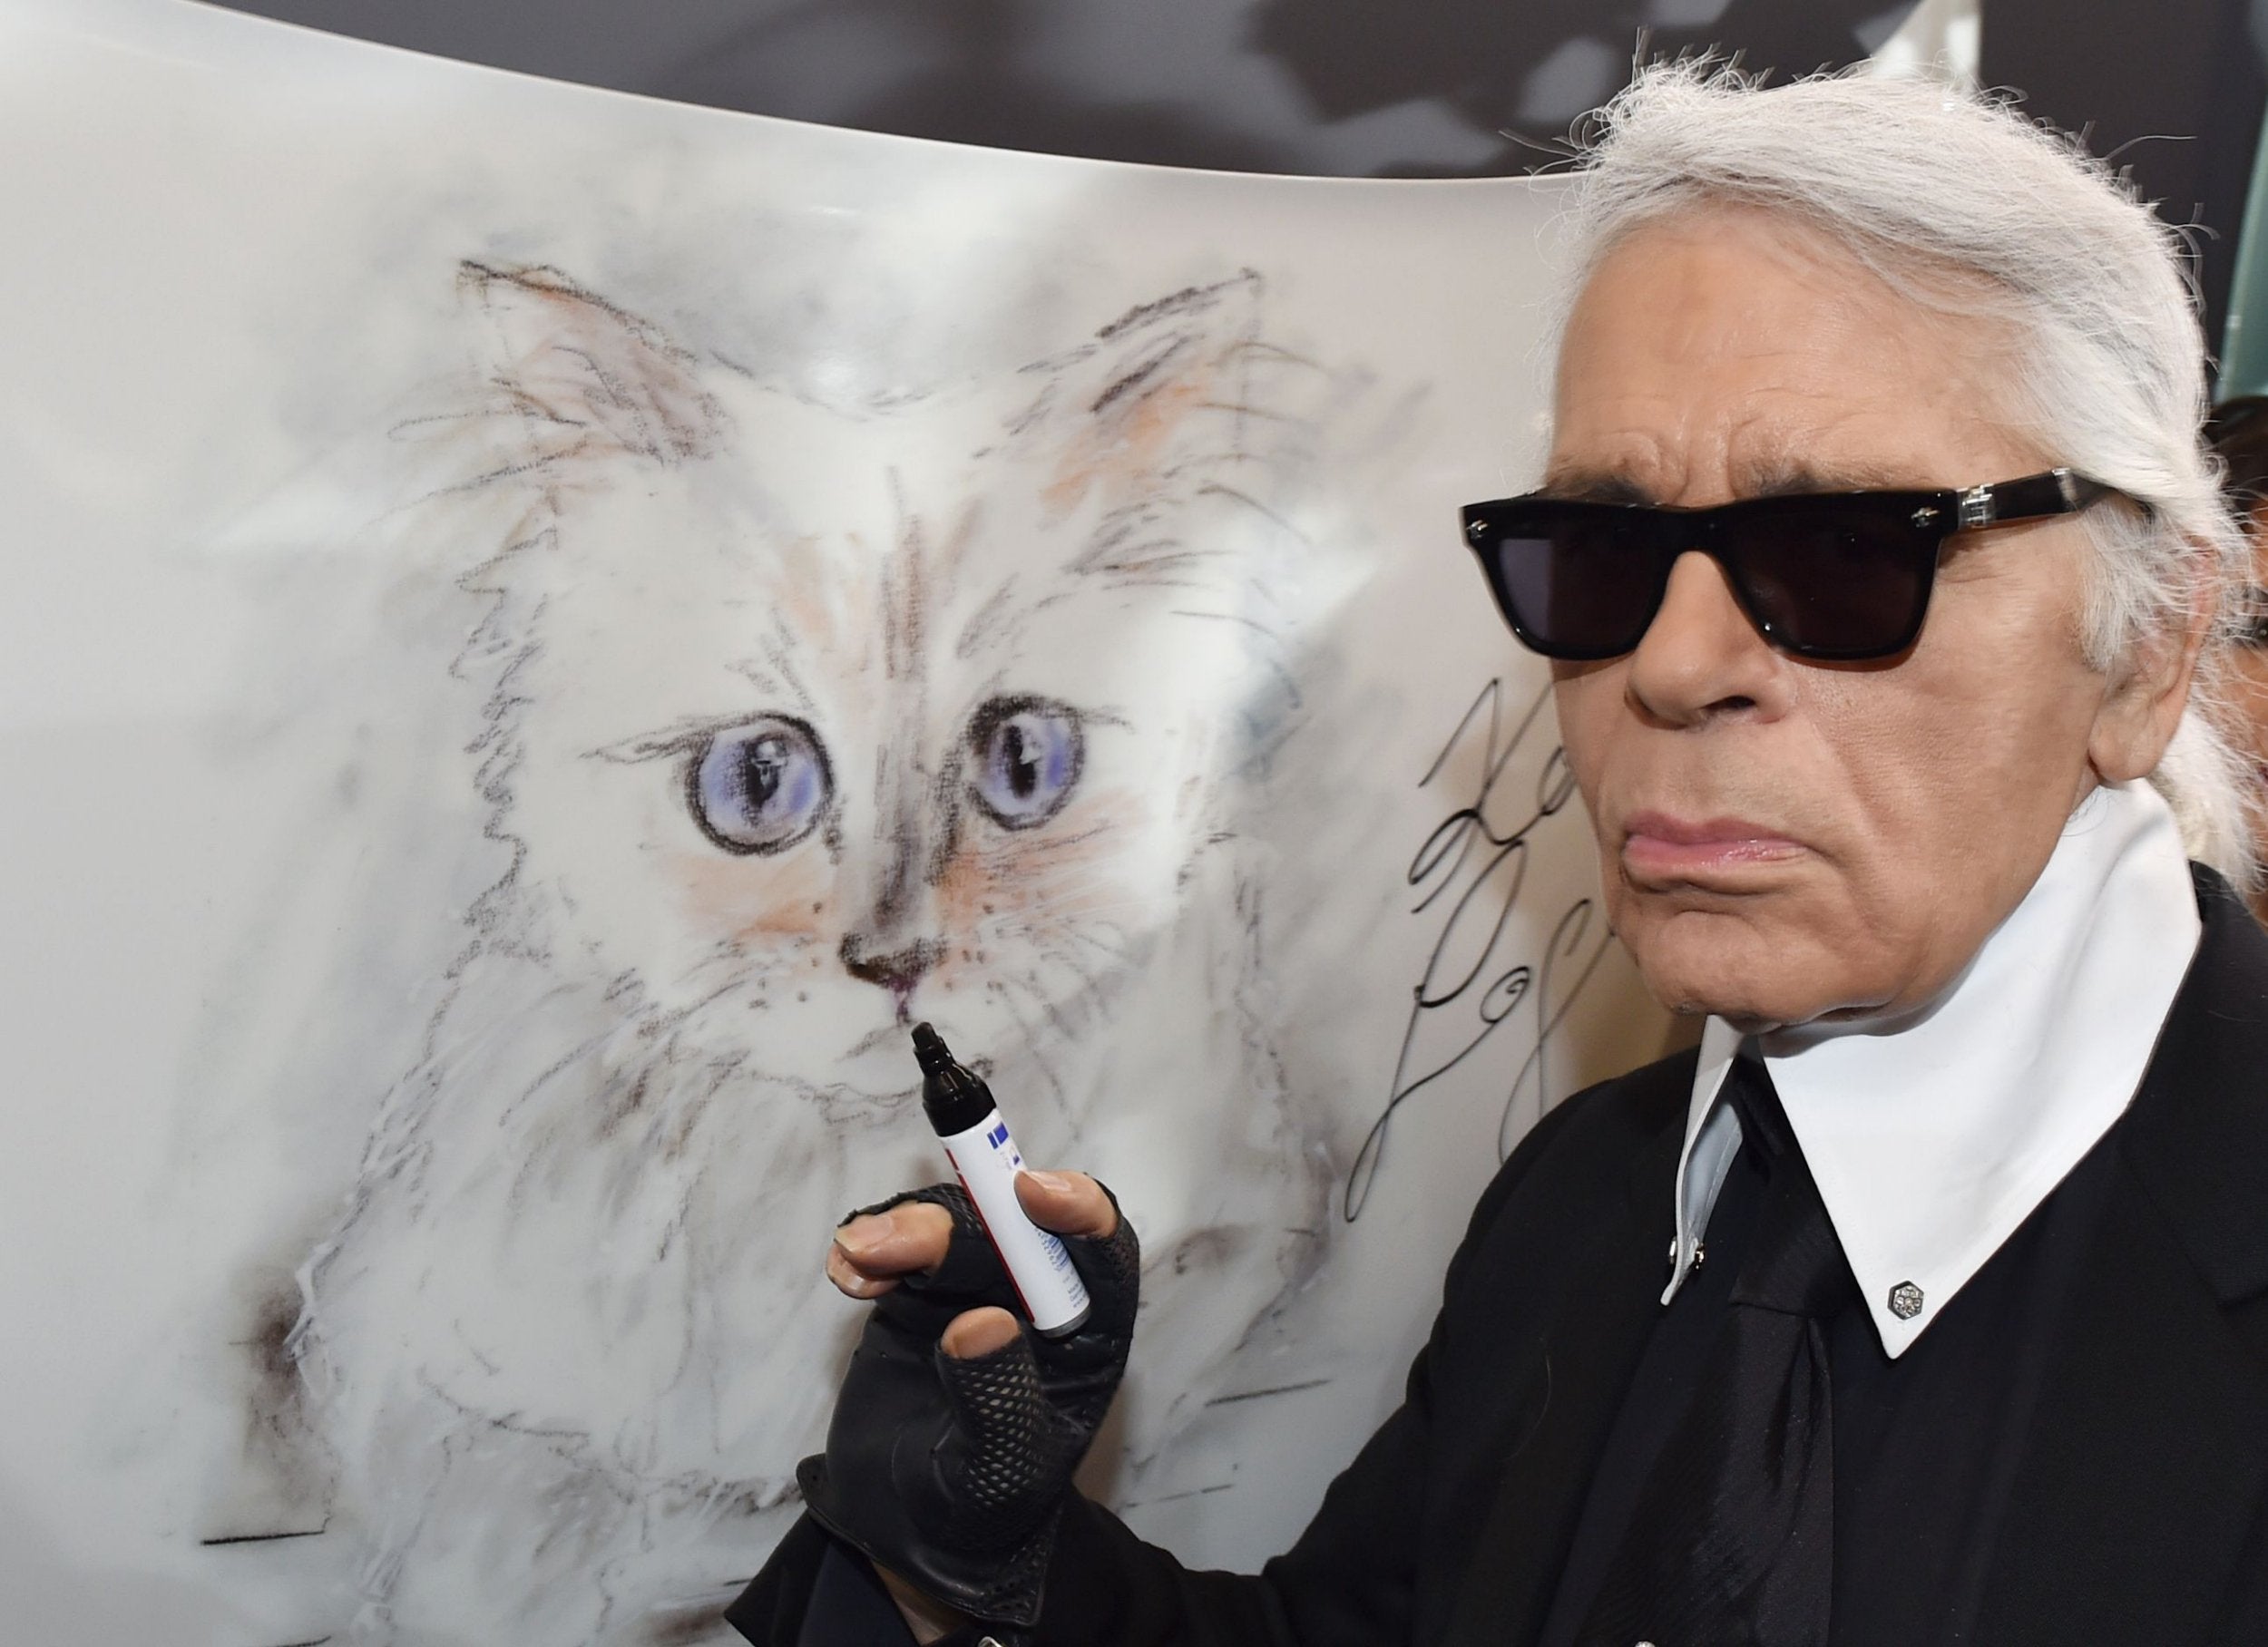 Lagerfeld next to a painting of his cat Choupette during the inauguration of the 2015 show ‘Corsa Karl and Choupette’ at the Palazzo Italia in Berlin